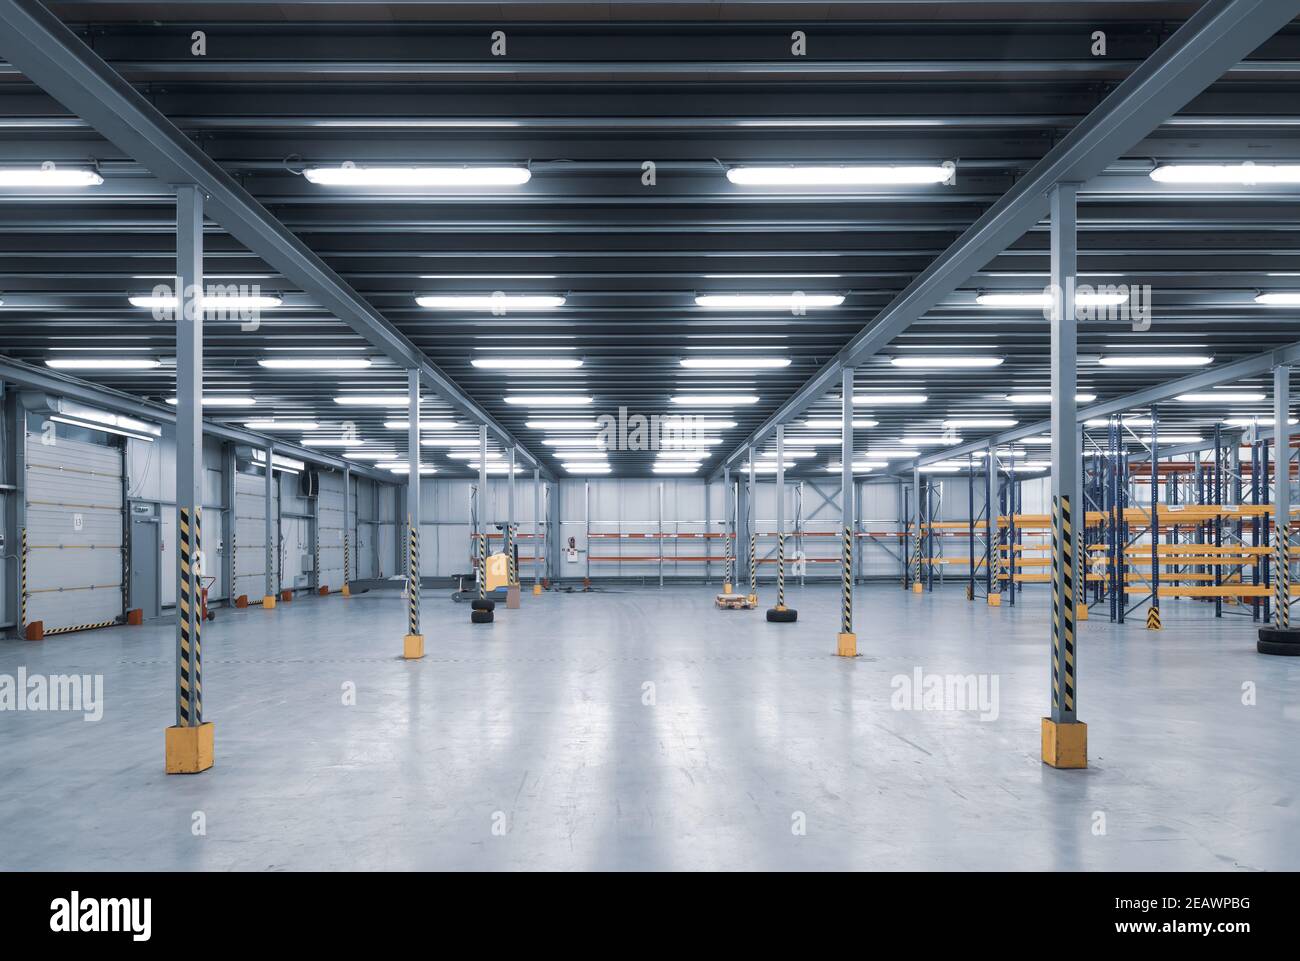 Interior of huge empty storehouse. Industrial warehouse racking. Stock Photo